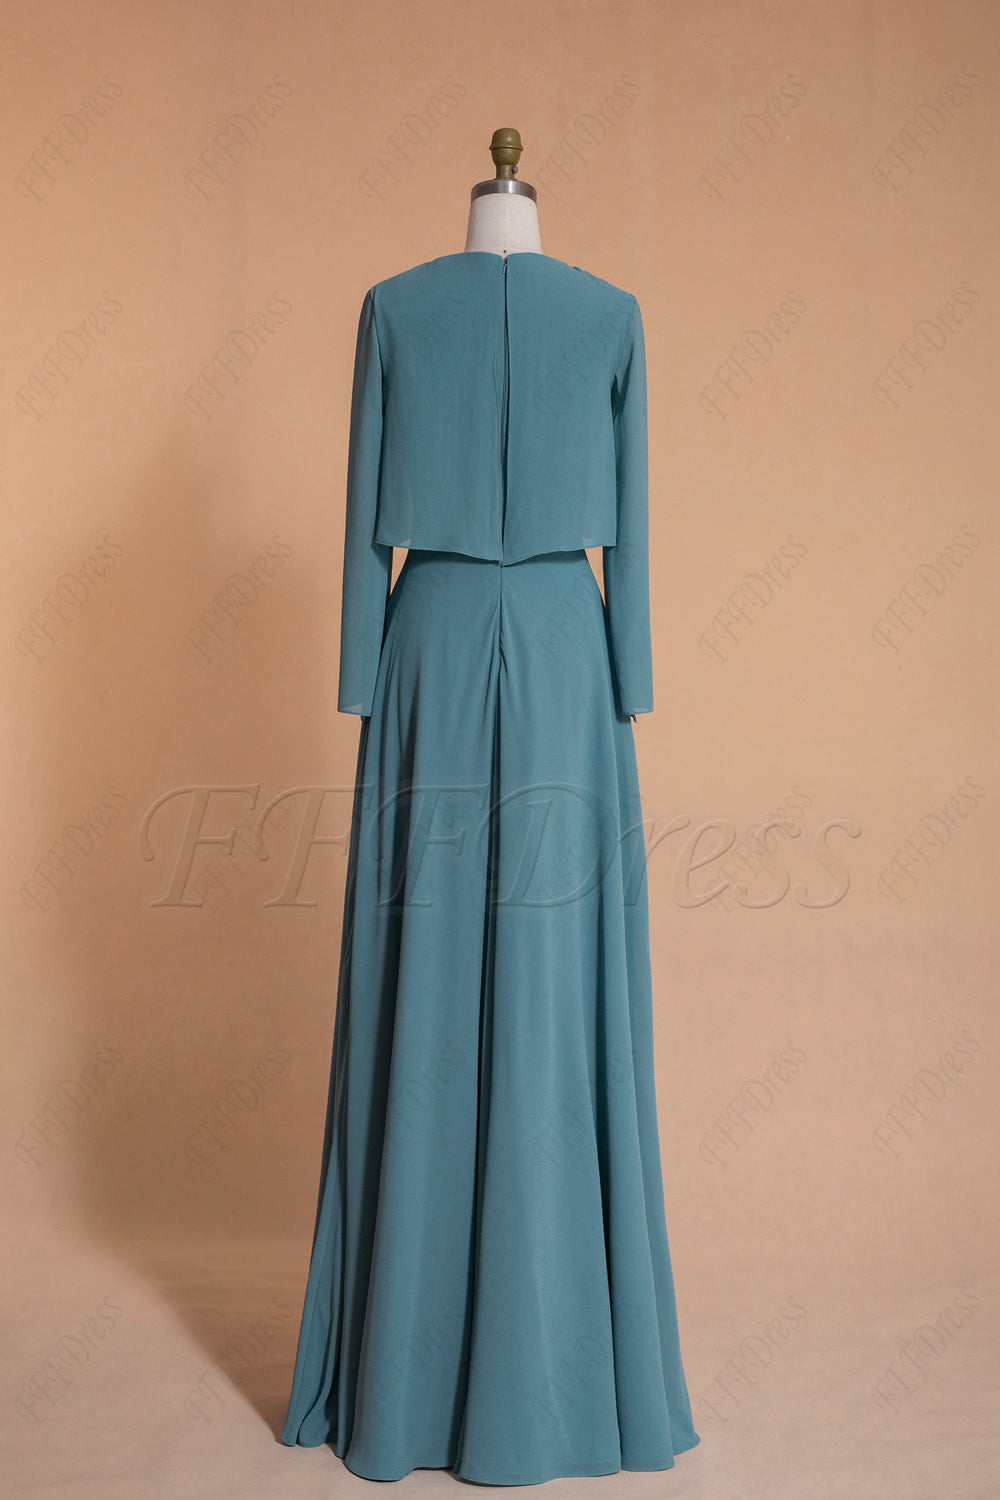 Modest Sea glass green bridesmaid dresses with long sleeves